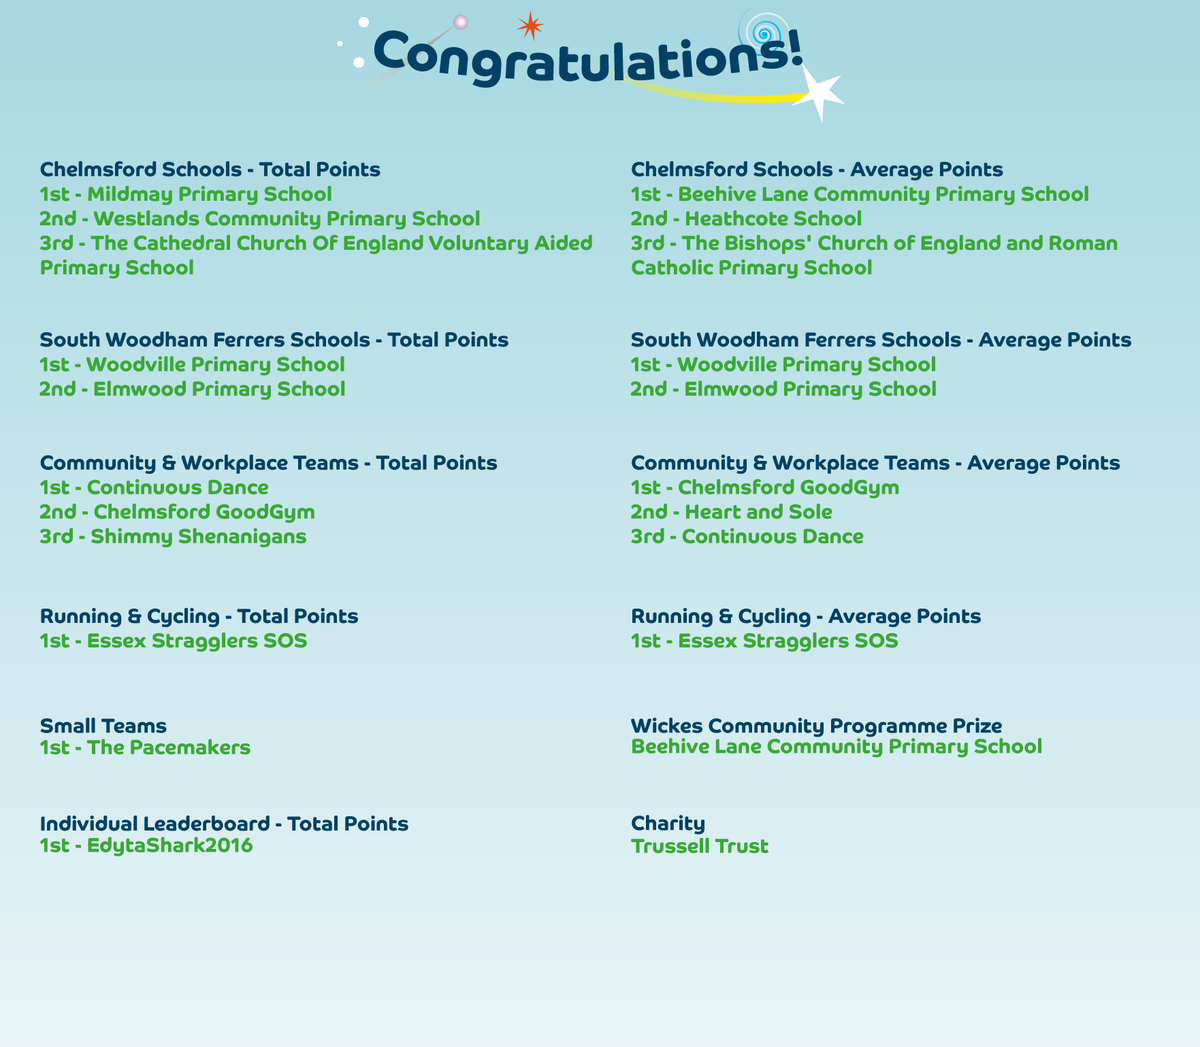 Chelmsford & South Woodham Ferrers, you walked, cycled and wheeled an incredible 106,297 miles in 6 weeks. Congratulations to our leaderboard winners and thank you to everyone who got out exploring as part of Beat the Street! @AngliaRuskin @ARUWrittle @ChelmsCouncil @Wickes